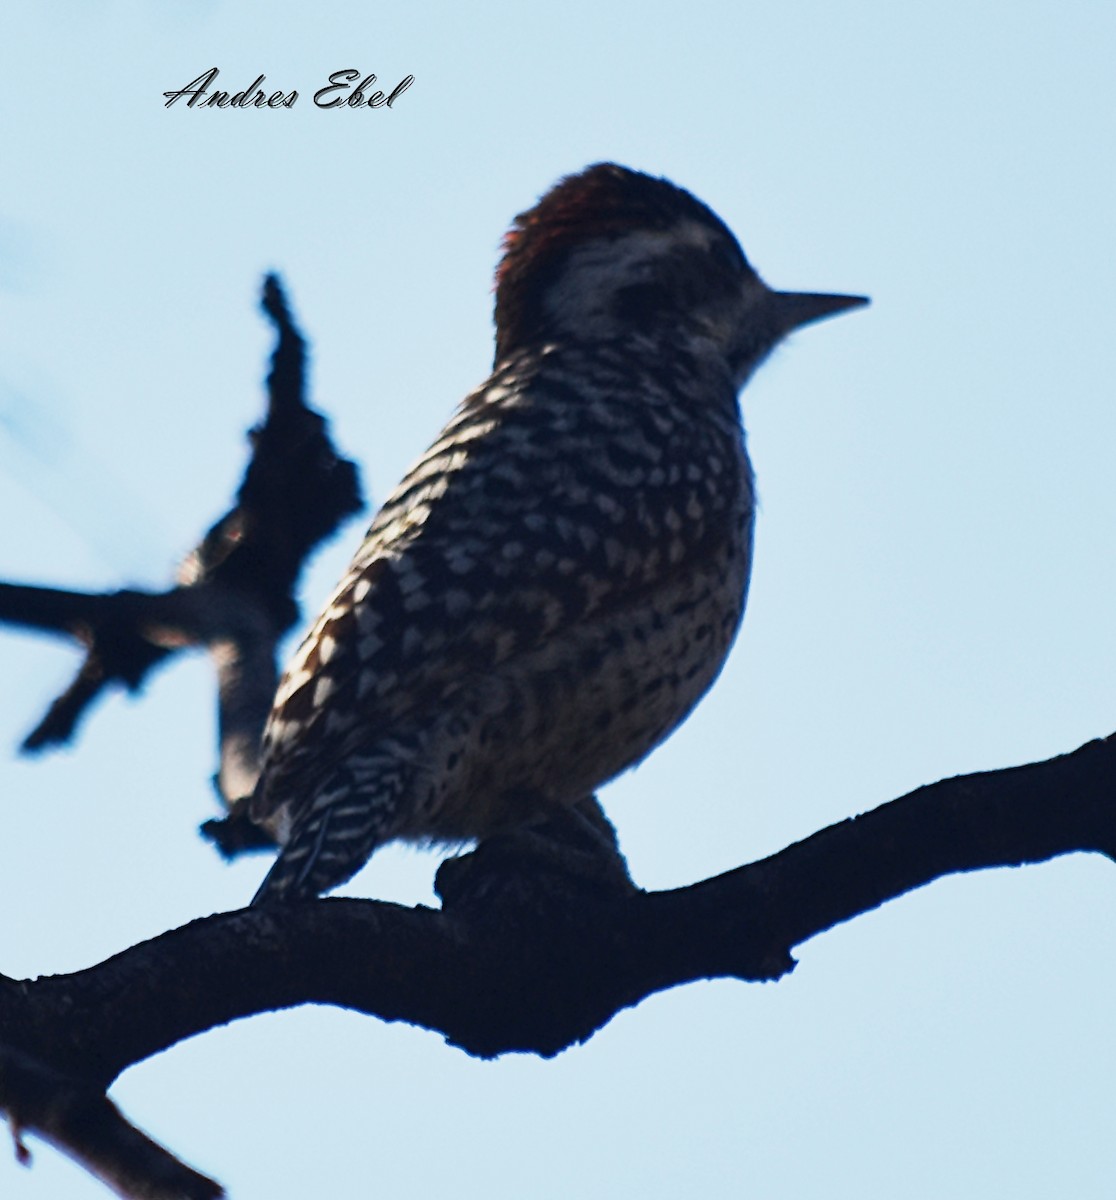 Checkered Woodpecker - andres ebel